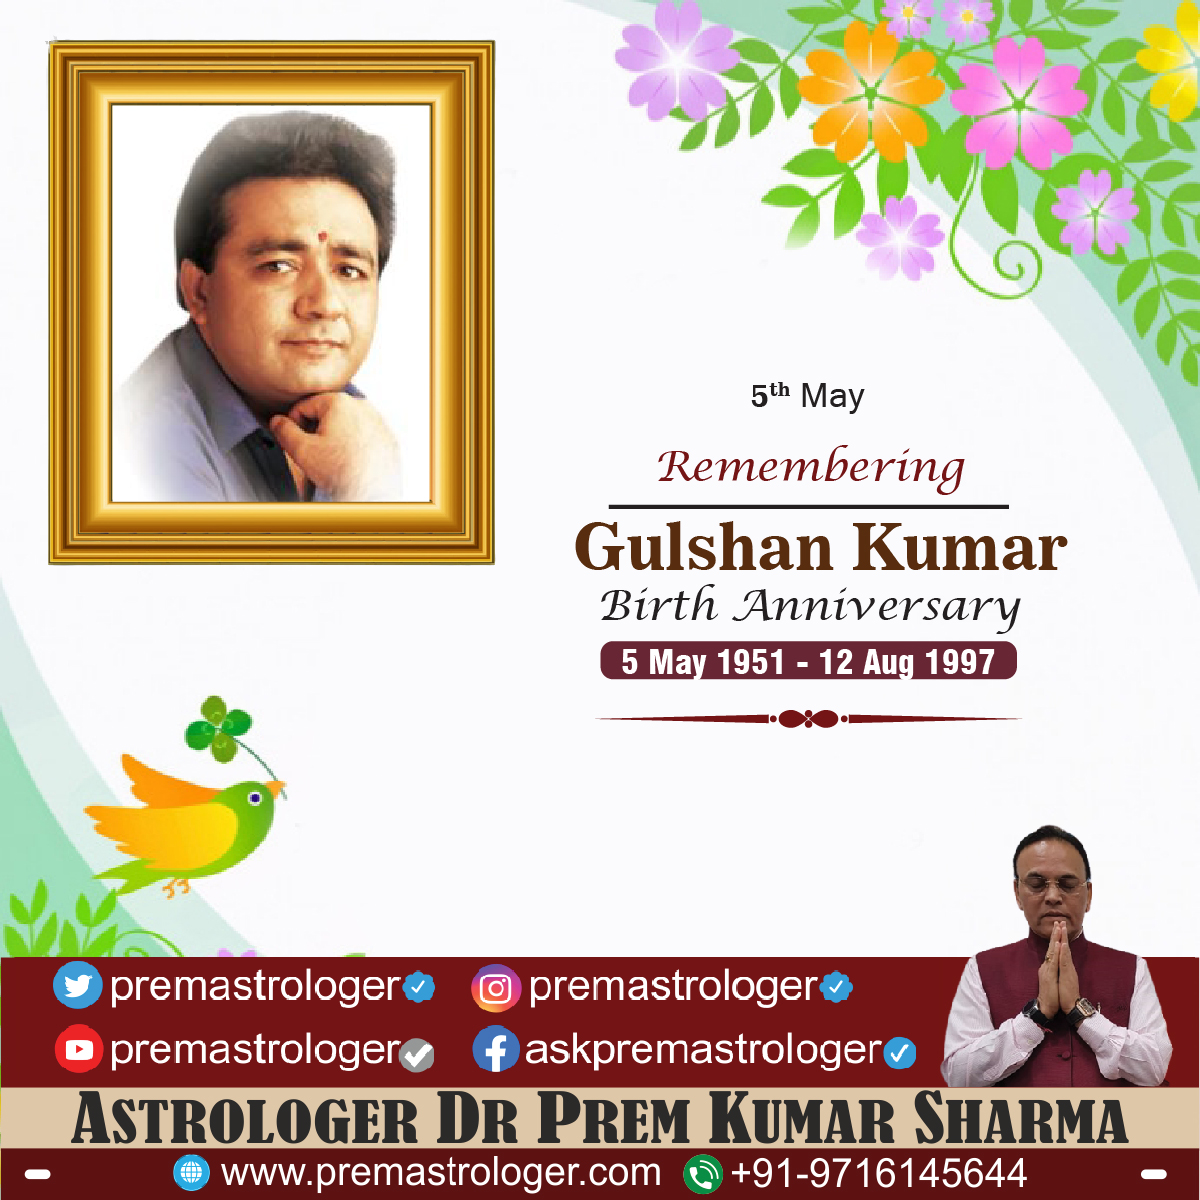 Honoring memory of TSeries’ Gulshan Kumar Ji, whose visionary leadership reshaped the music industry. His unparalleled efforts sparked a musical revolution that continues to resonate. A great soul whose legacy lives on, despite leaving us too soon. 
#BirthAnniversary
#producer